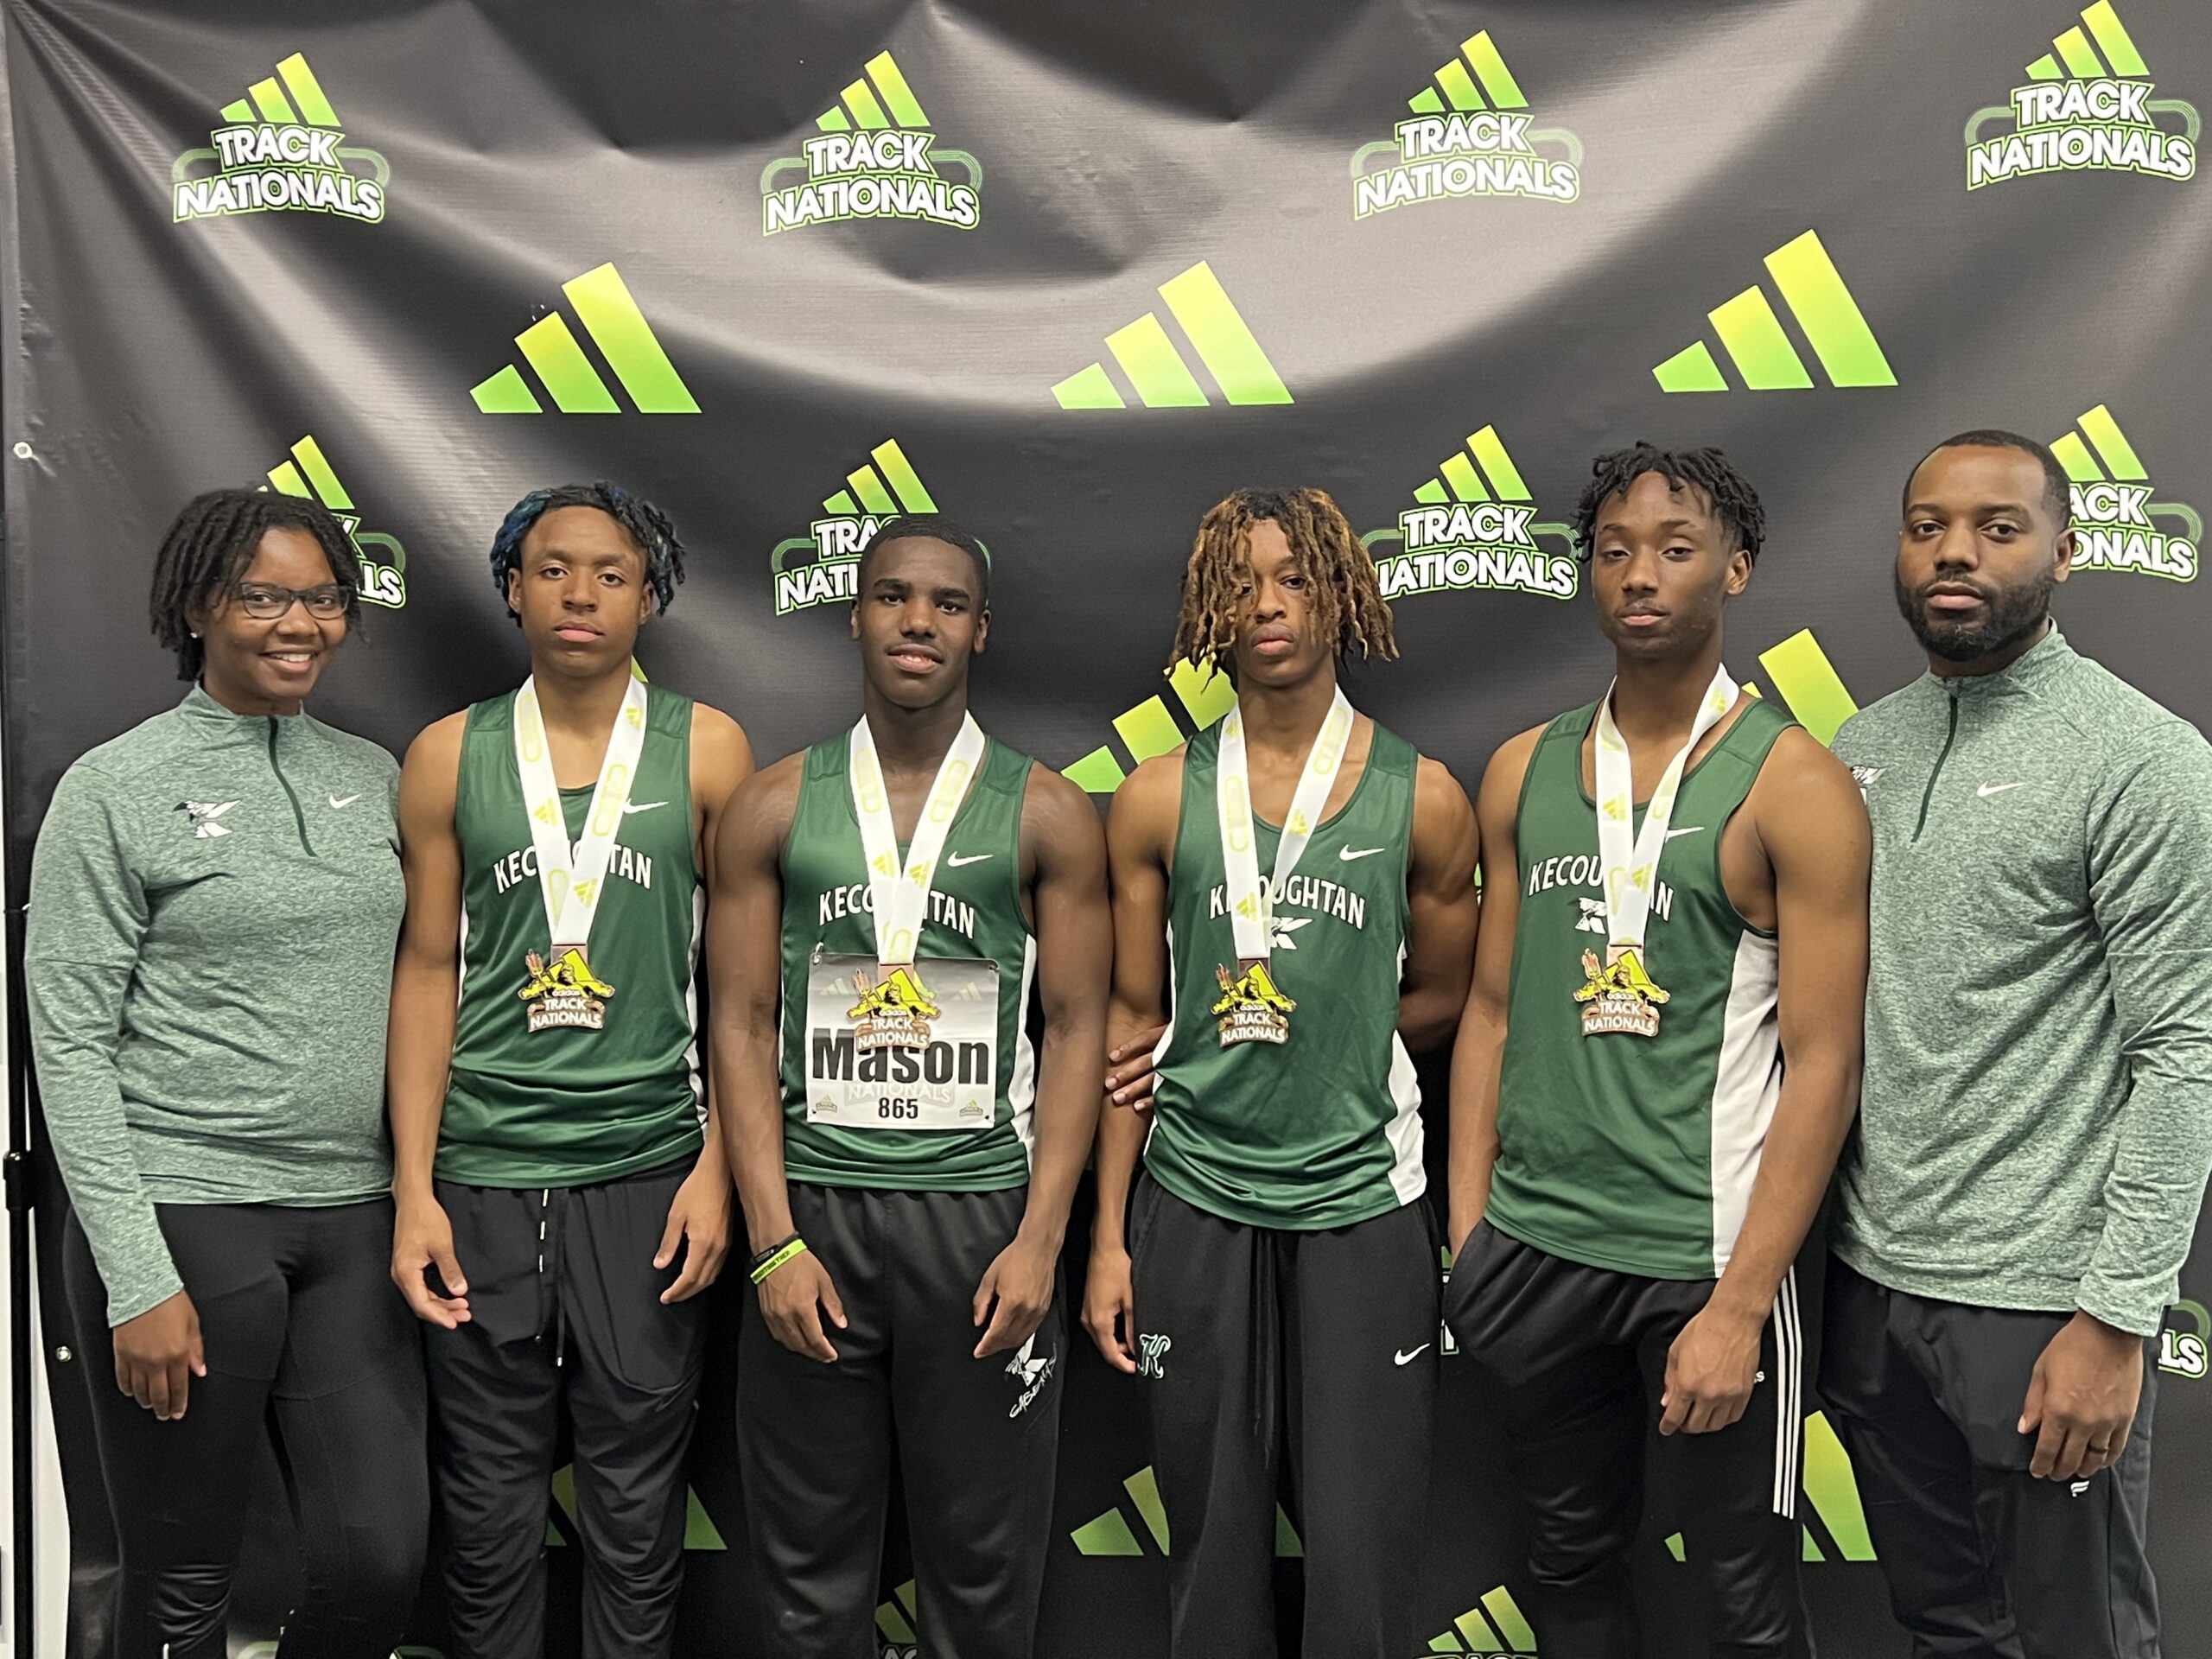 Kecoughtan boys 4×4 team 3rd.  IN THE ADIDAS INDOOR NATIONAL CHAMPIONSHIPS!!! Let’s Go!!!